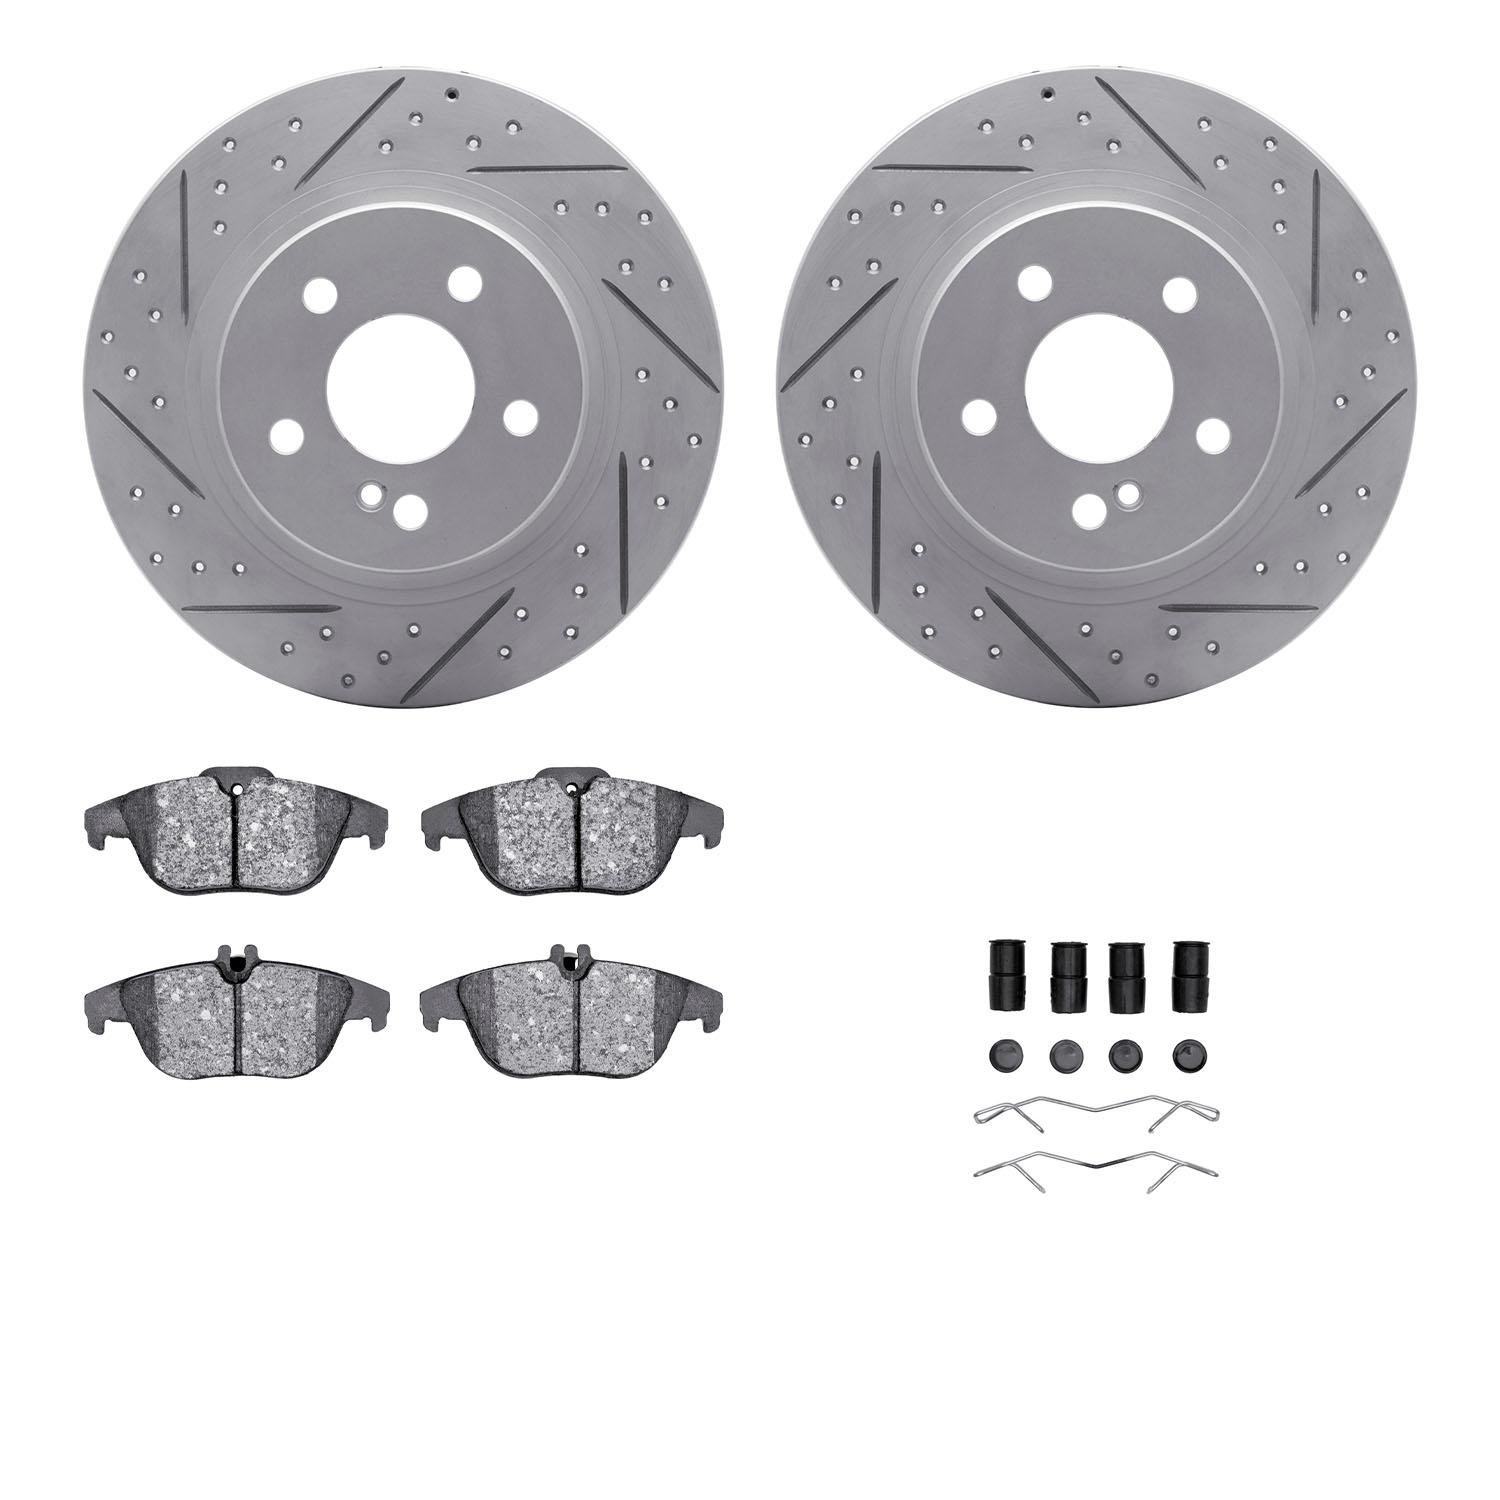 2512-63027 Geoperformance Drilled/Slotted Rotors w/5000 Advanced Brake Pads Kit & Hardware, 2008-2012 Mercedes-Benz, Position: R